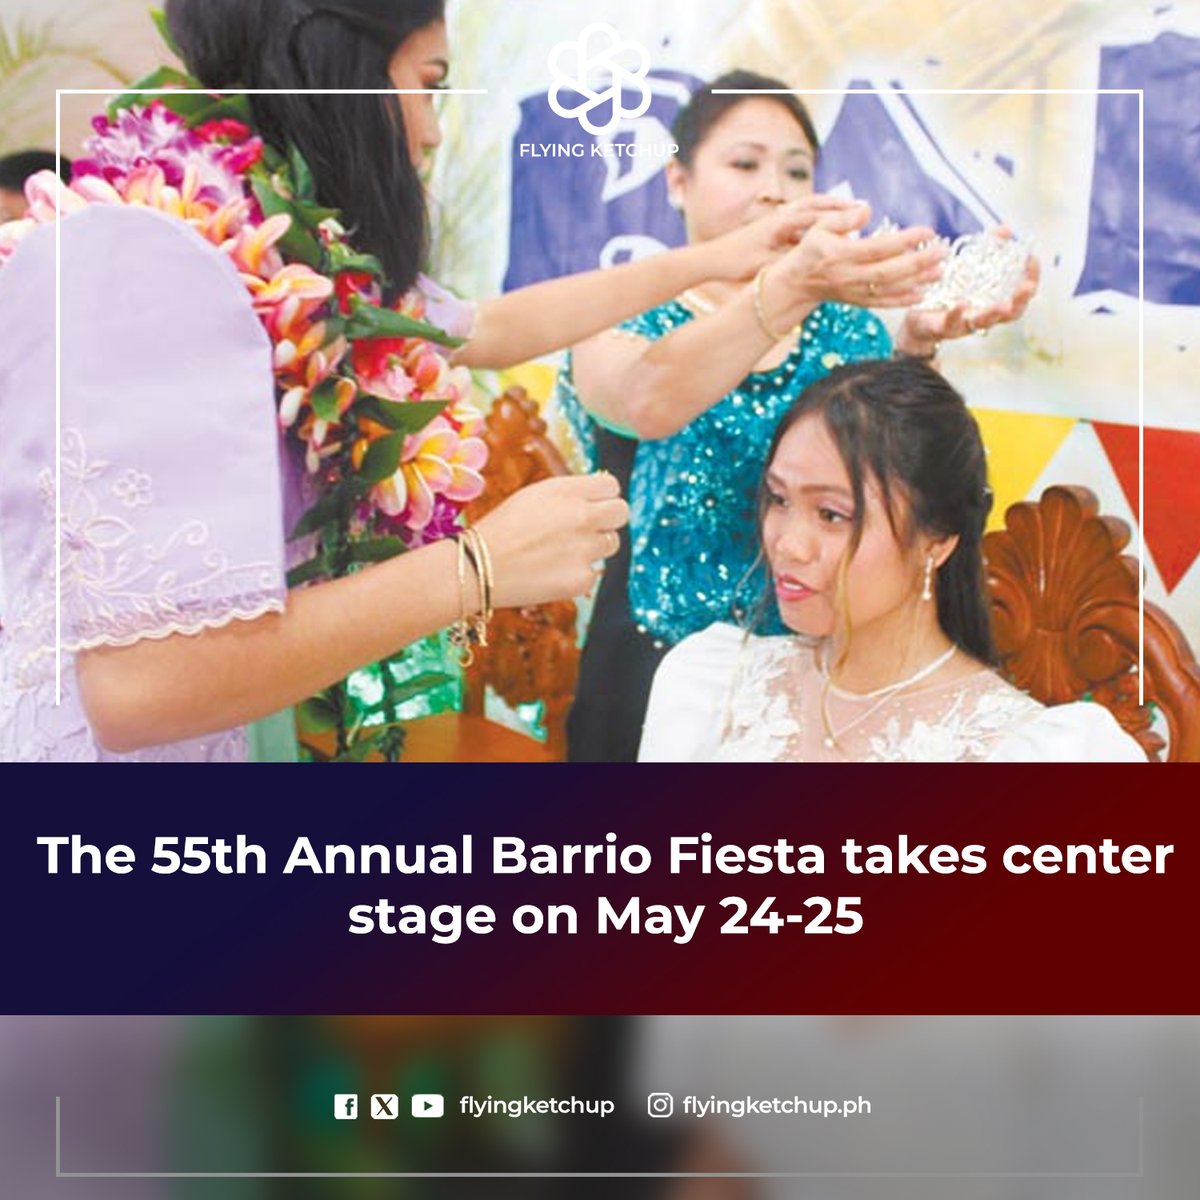 The 55th Annual Barrio Fiesta takes center stage on May 24-25!

The Barrio Fiesta was initiated by the Maui Filipino CommunityCouncil and first held on May 31, 1970 at the War Memorial grounds near the swimming pool.

READ MORE: is.gd/38Qi1r

#FlyingKetchup